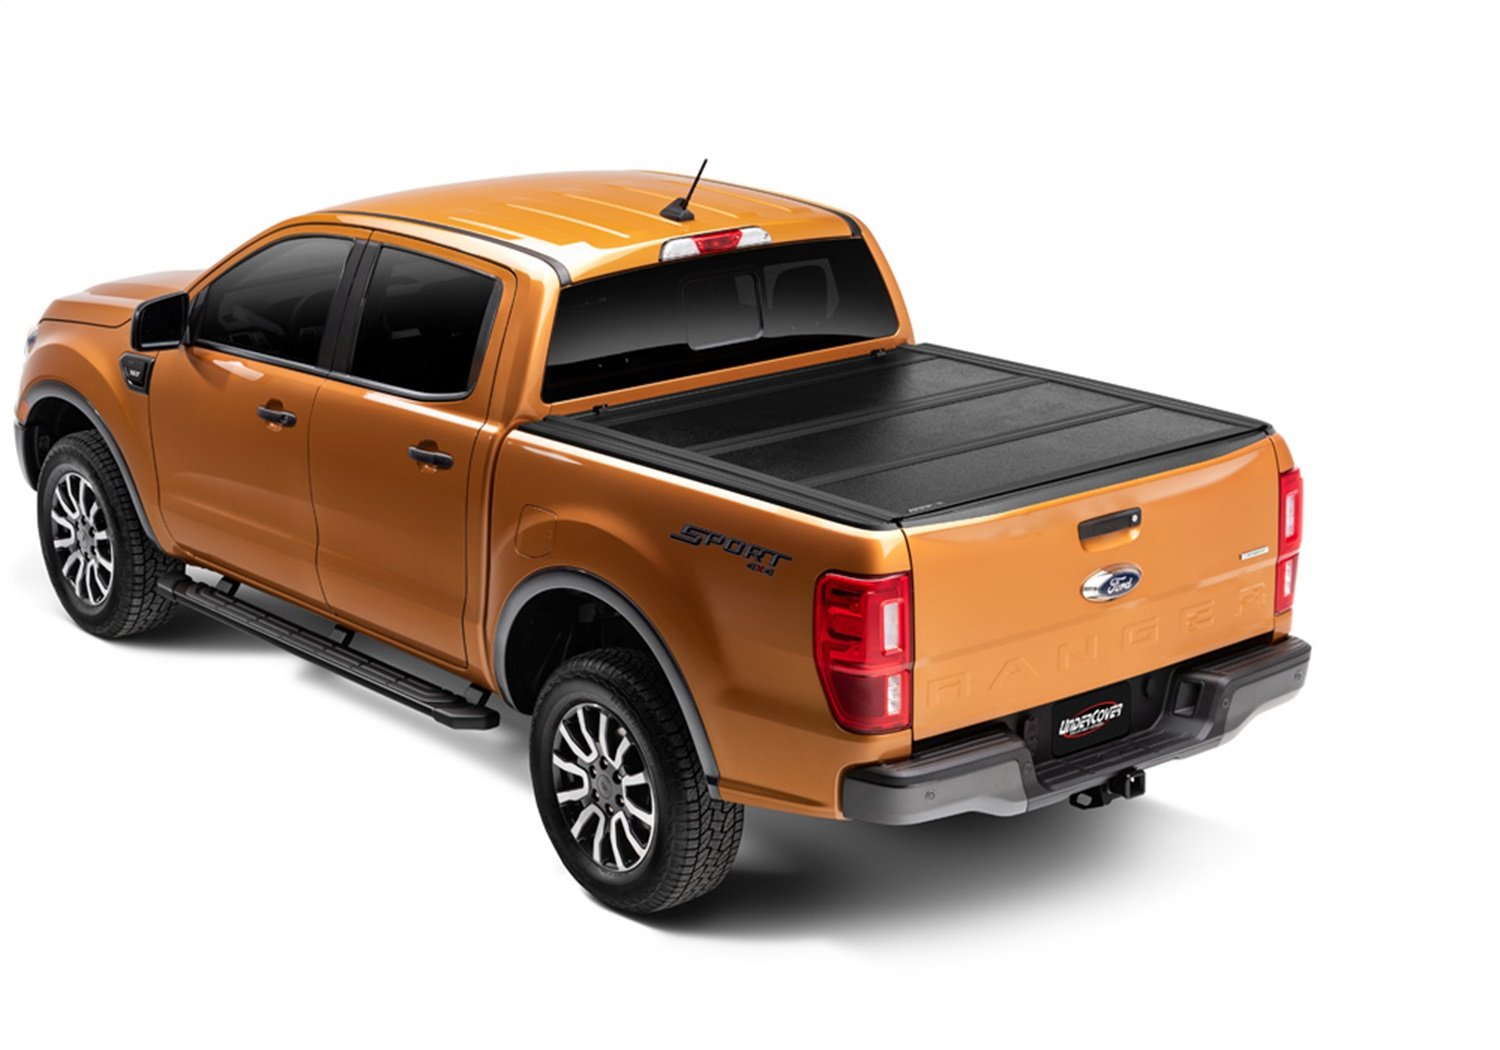 FX21022 Flex Hard Folding Cover, Fits Select Ford Ranger Crew Cab, 5'Bed, Black Textured